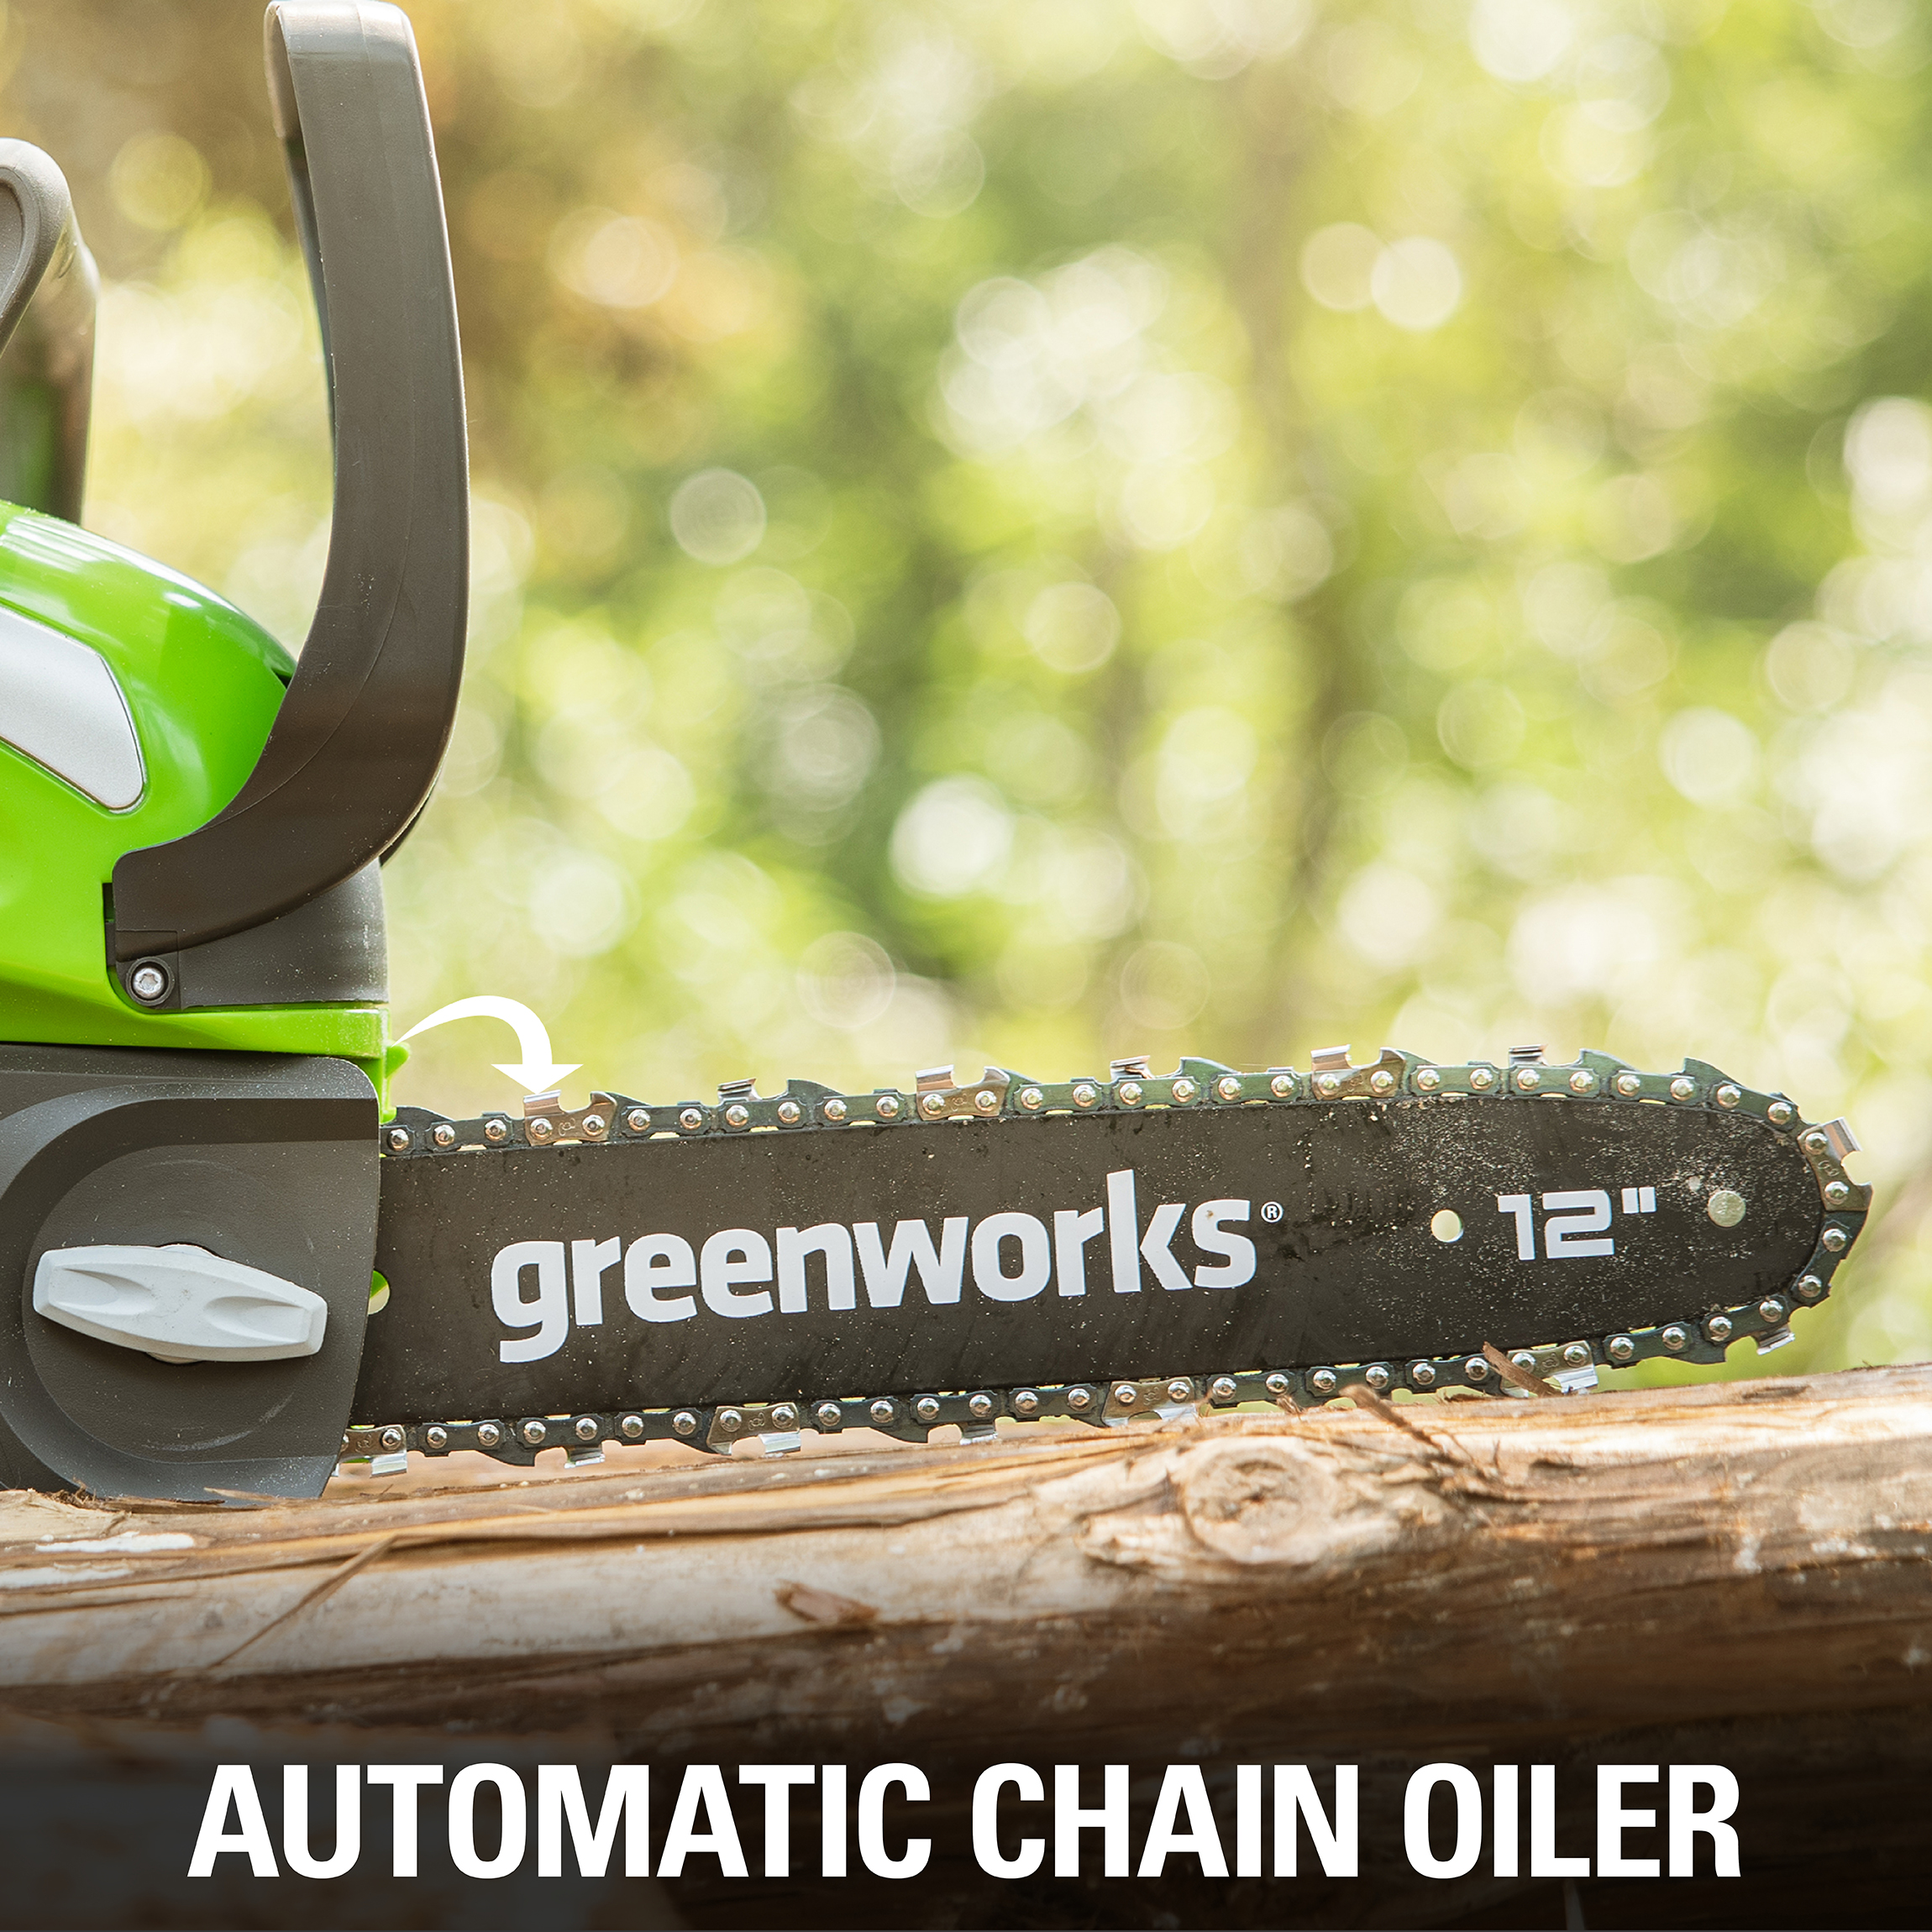 GreenWorks 20292 40V 12" Cordless Chainsaw, Battery and Charger Sold Separately - image 11 of 14